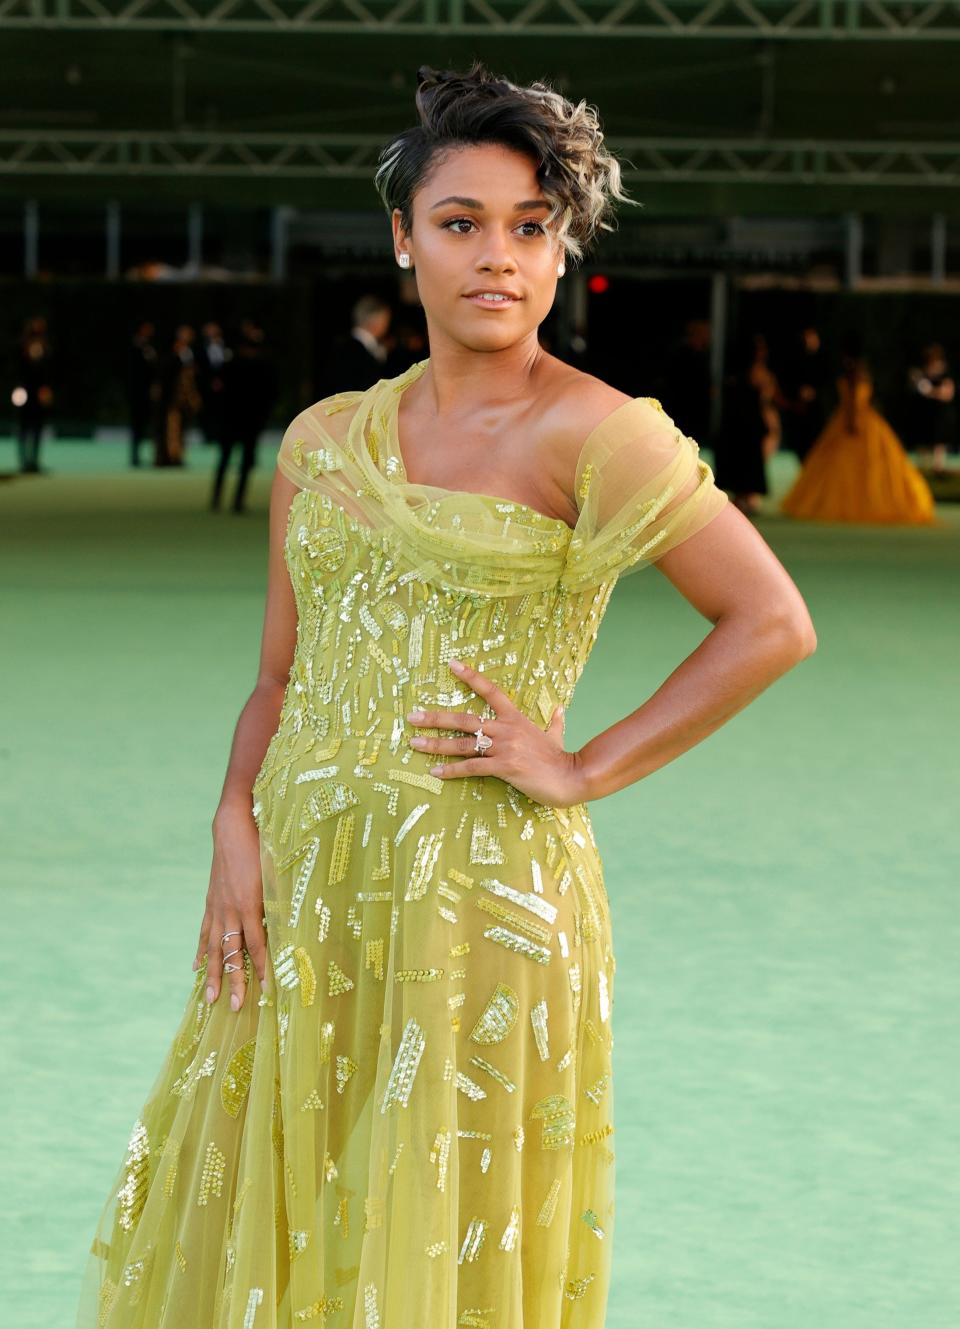 Ariana DeBose poses at The Academy Museum of Motion Pictures Opening Gala on September 25, 2021